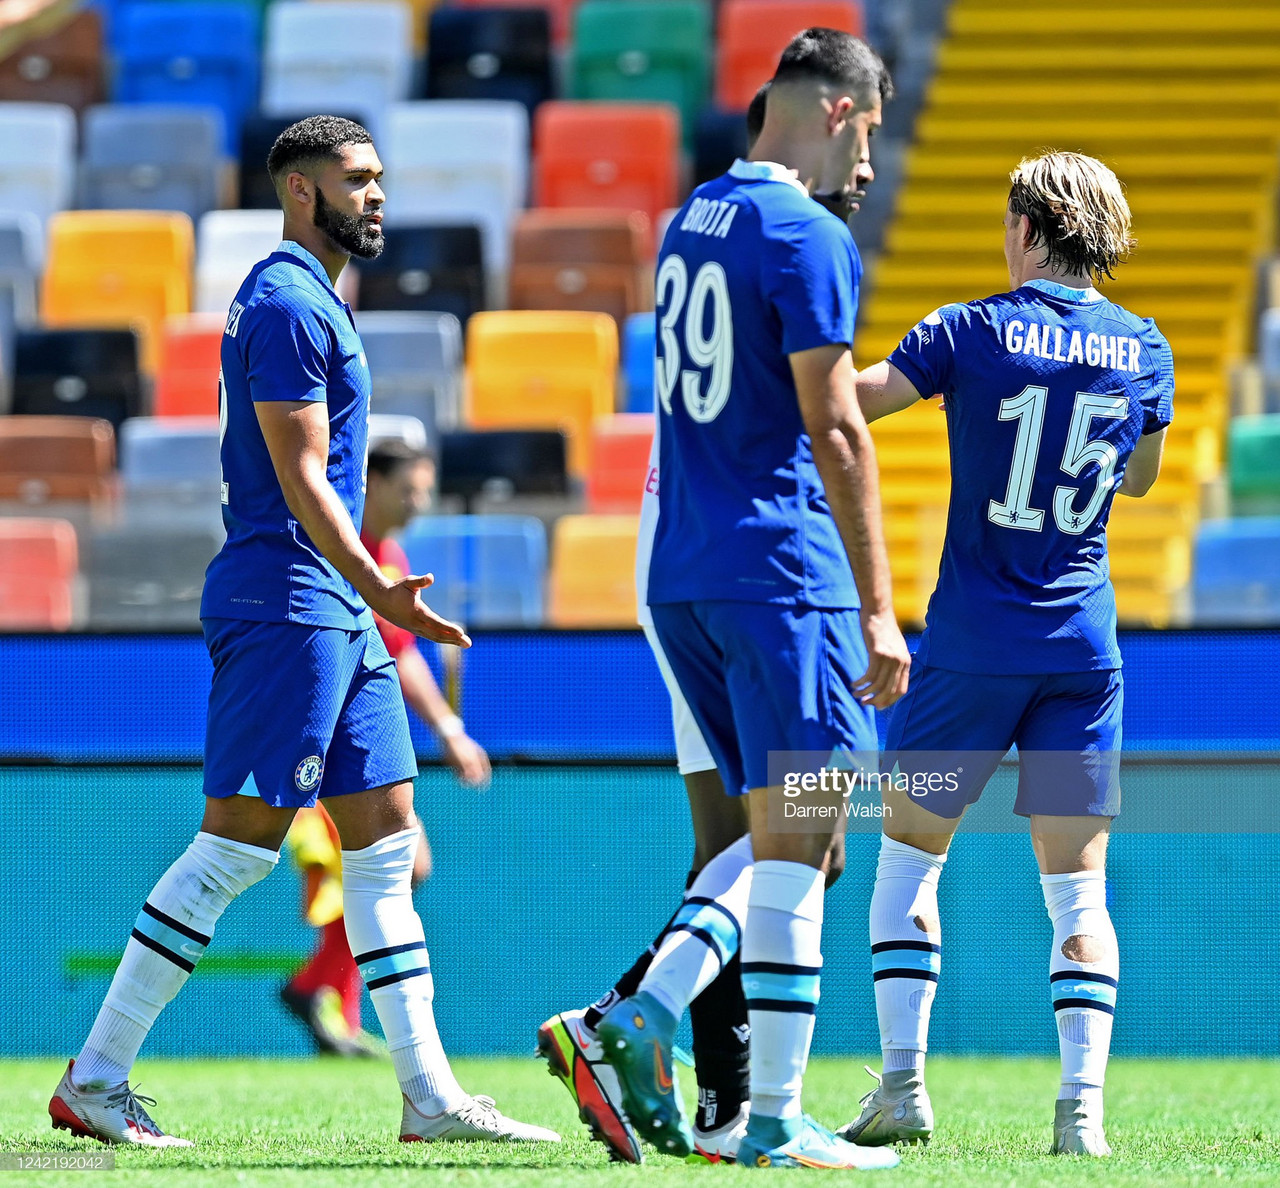 Udinese 0-2 Chelsea: Blues round off pre-season with a comfortable win in Italy